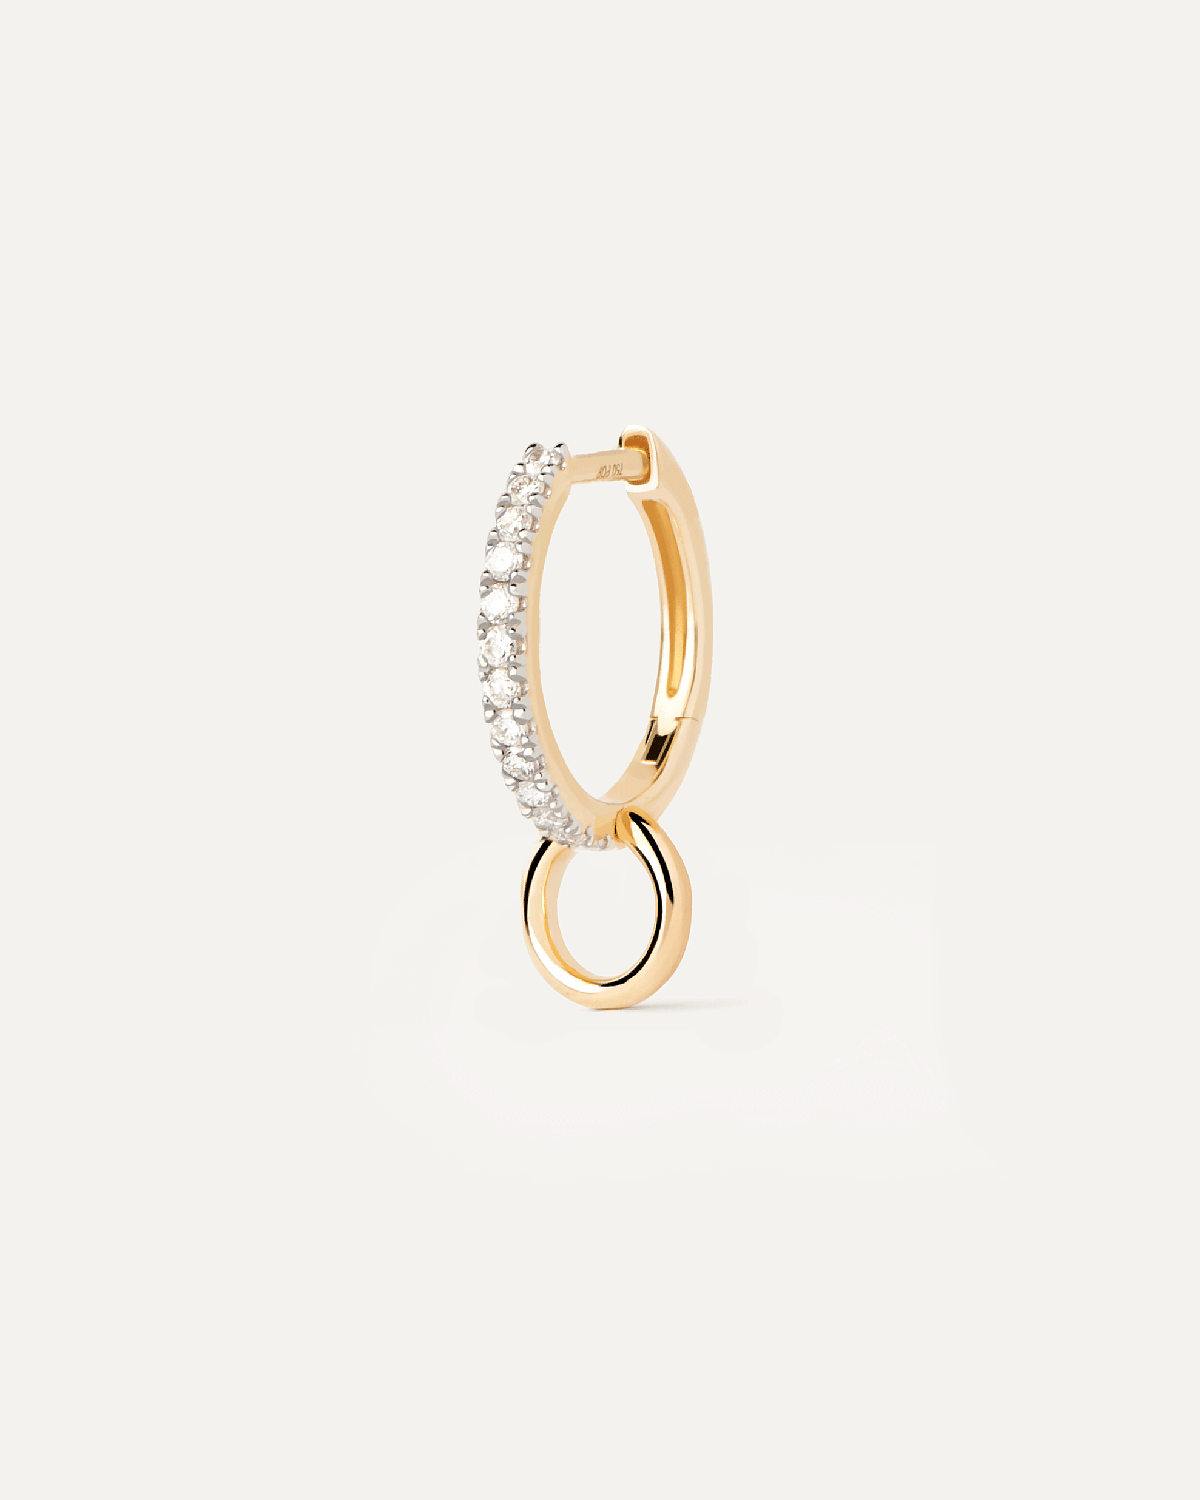 Diamonds and gold Circle single hoop. Sleek single hoop in solid yellow gold and lab-grown diamonds with a swinging circular pendant. Get the latest arrival from PDPAOLA. Place your order safely and get this Best Seller.